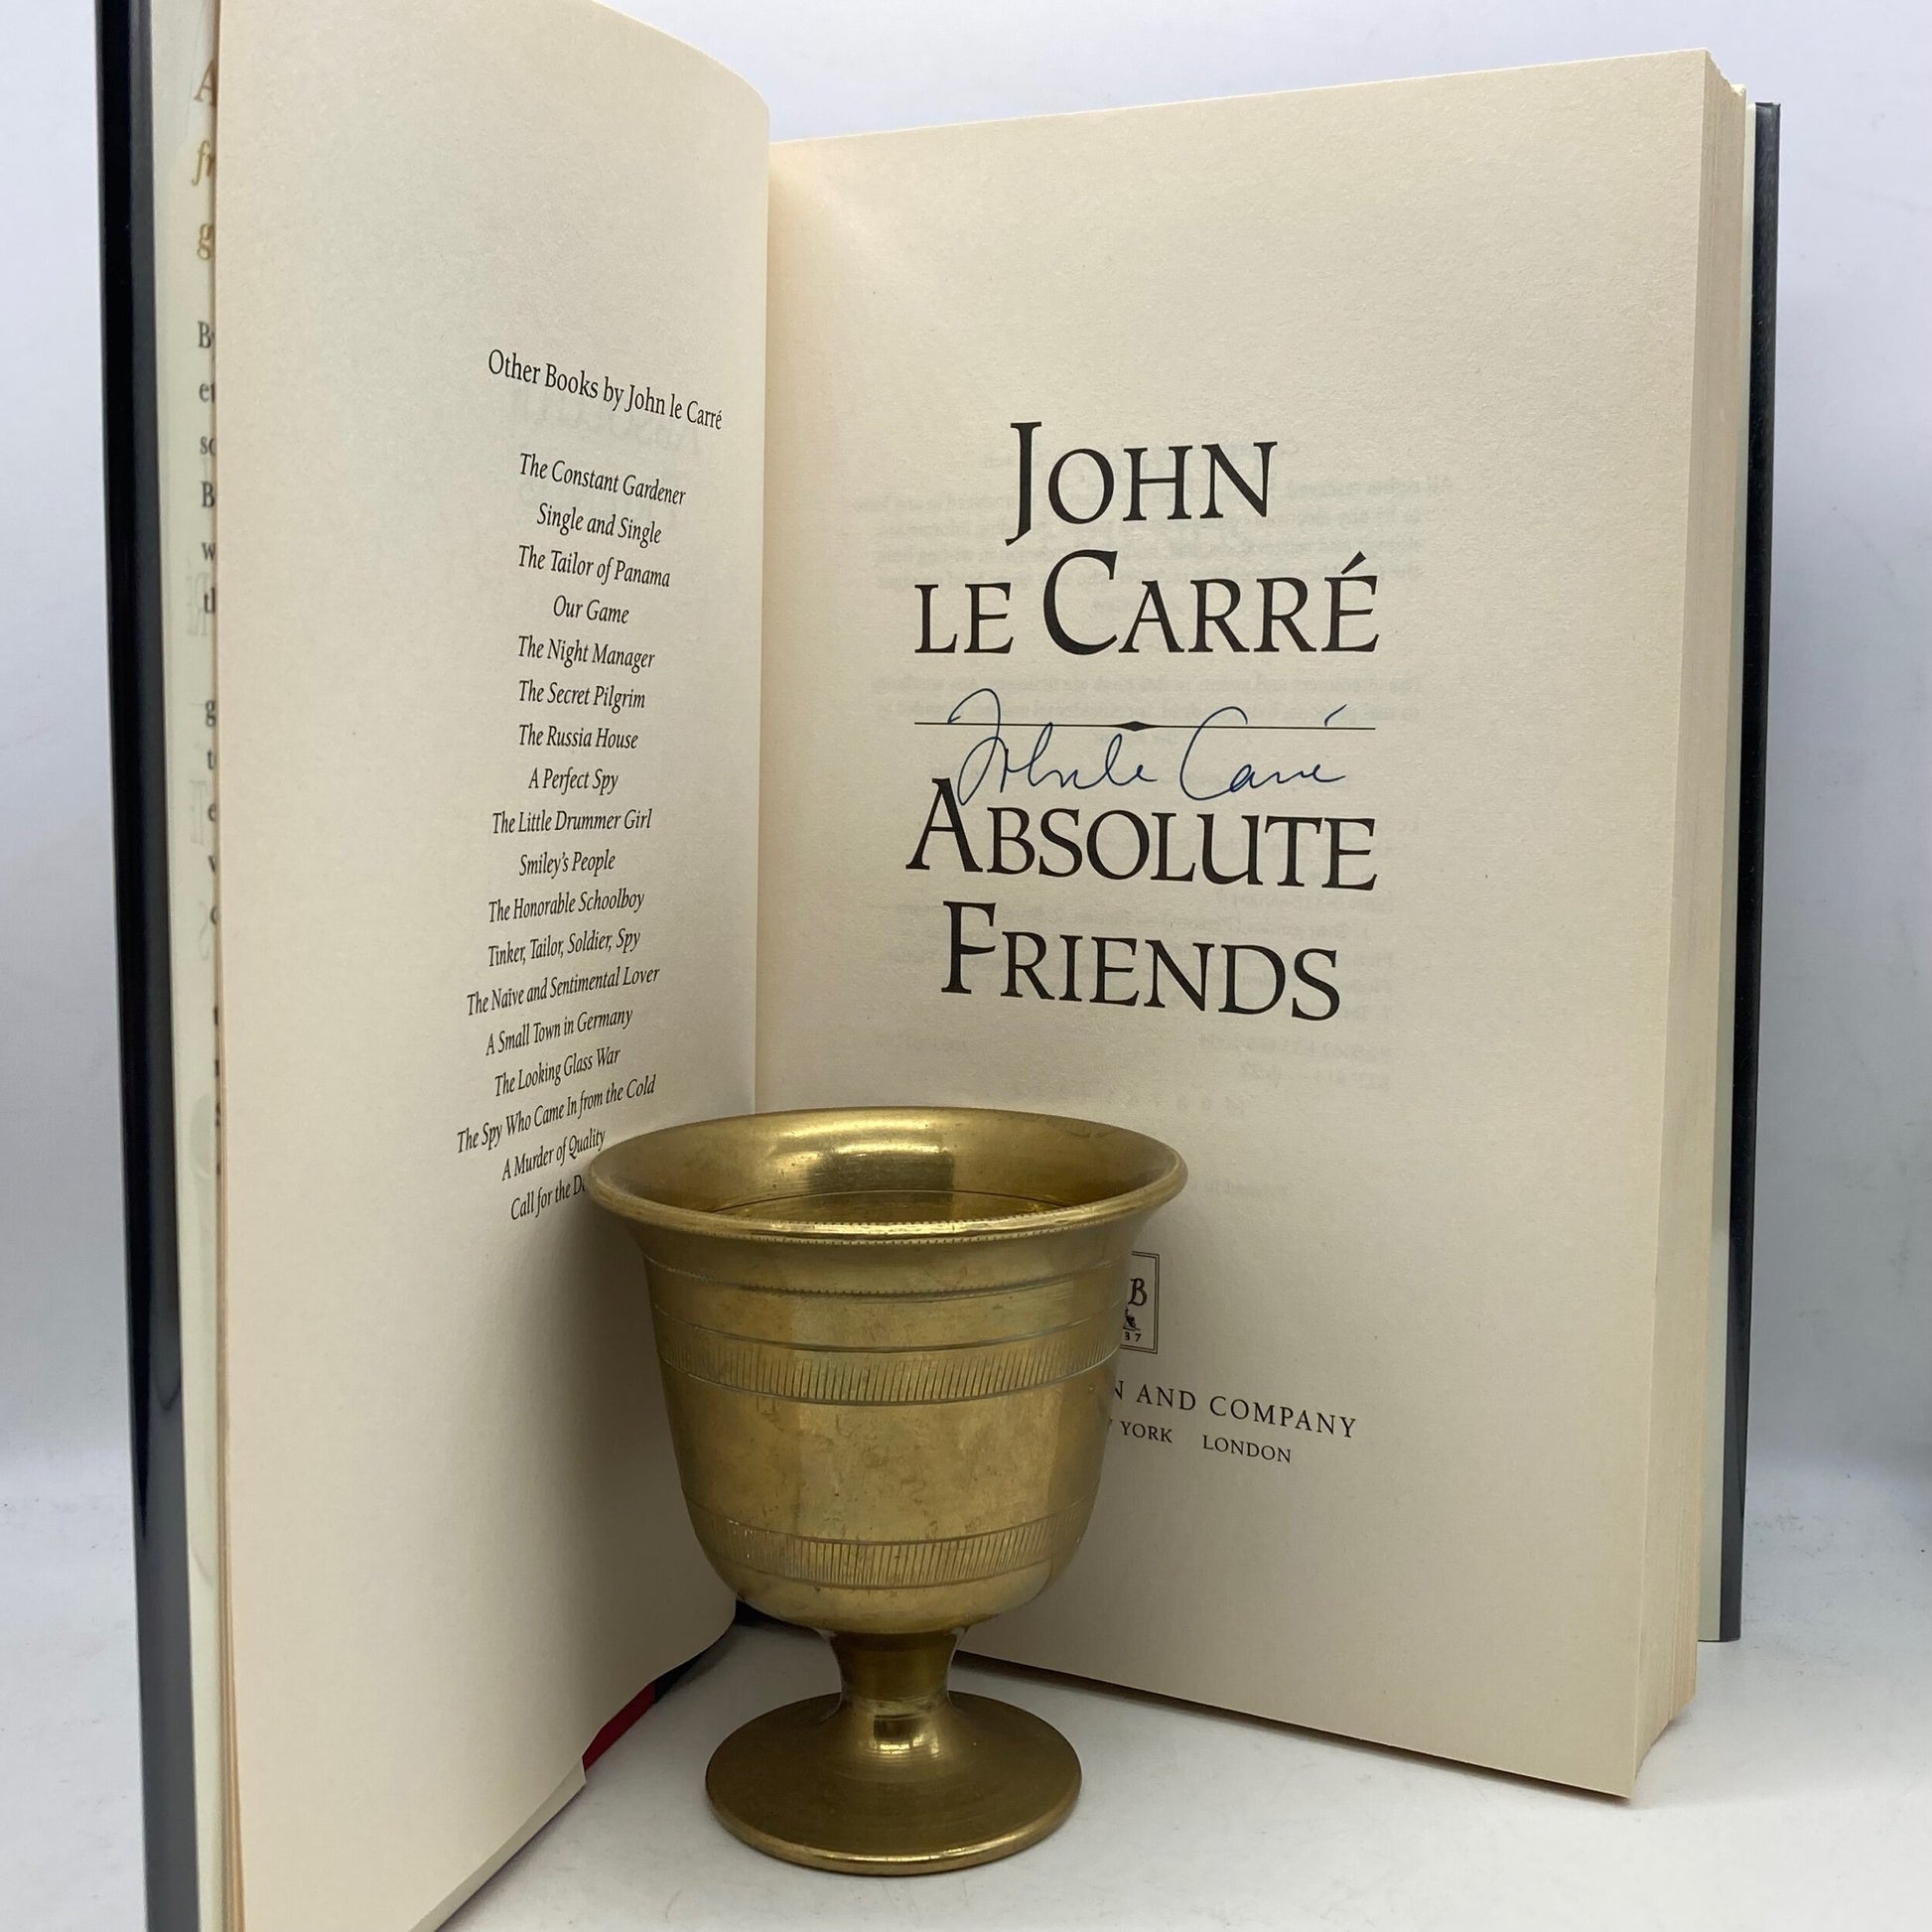 LE CARRE, John "Absolute Friends" [Little, Brown & Co, 2003] 1st Edition (Signed) - Buzz Bookstore